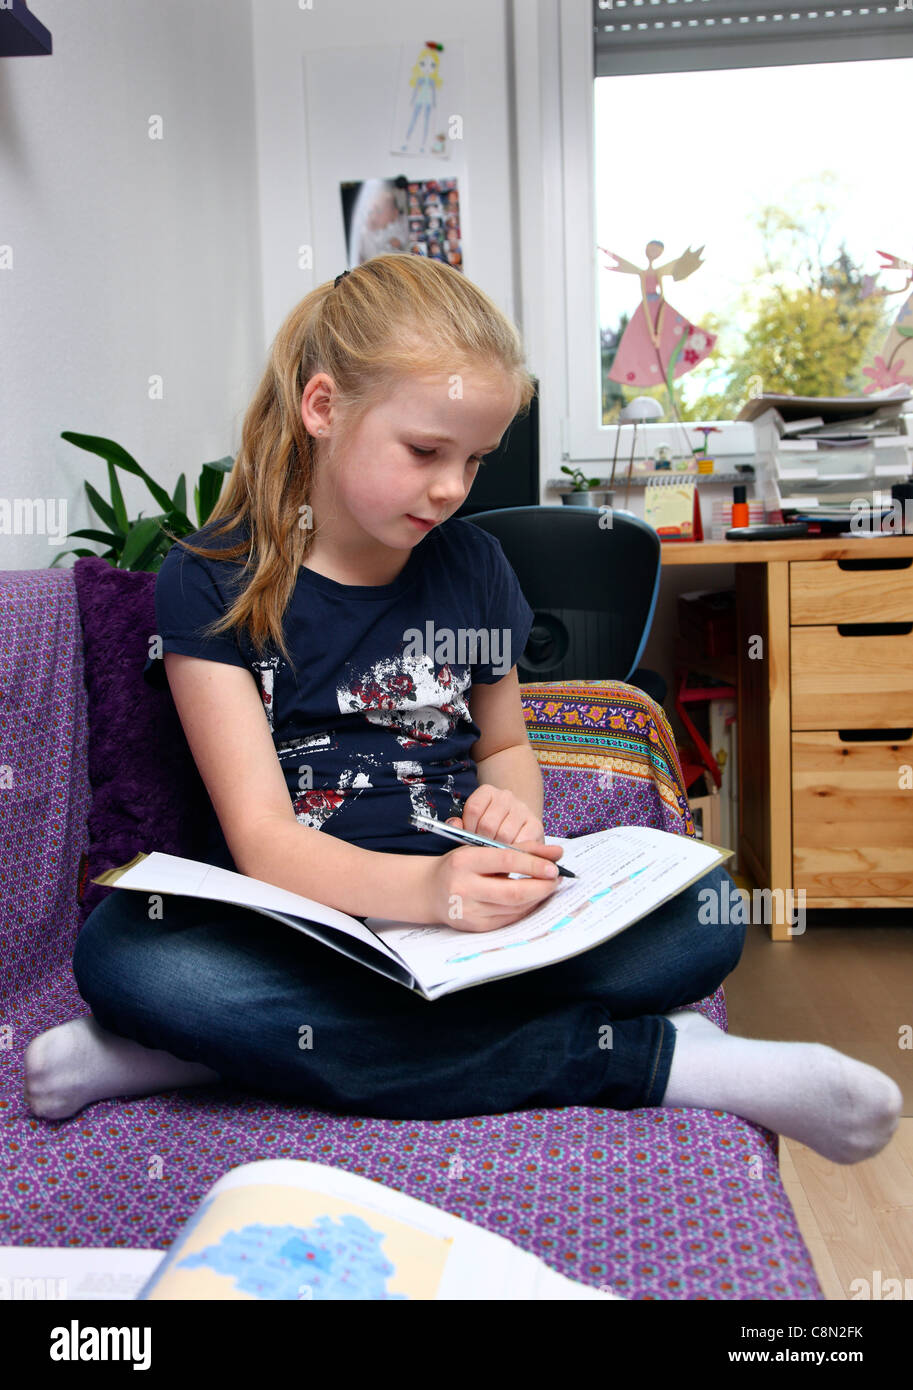 Girl, 10 years old, learning for school, at home in her room, doing homework. Stock Photo